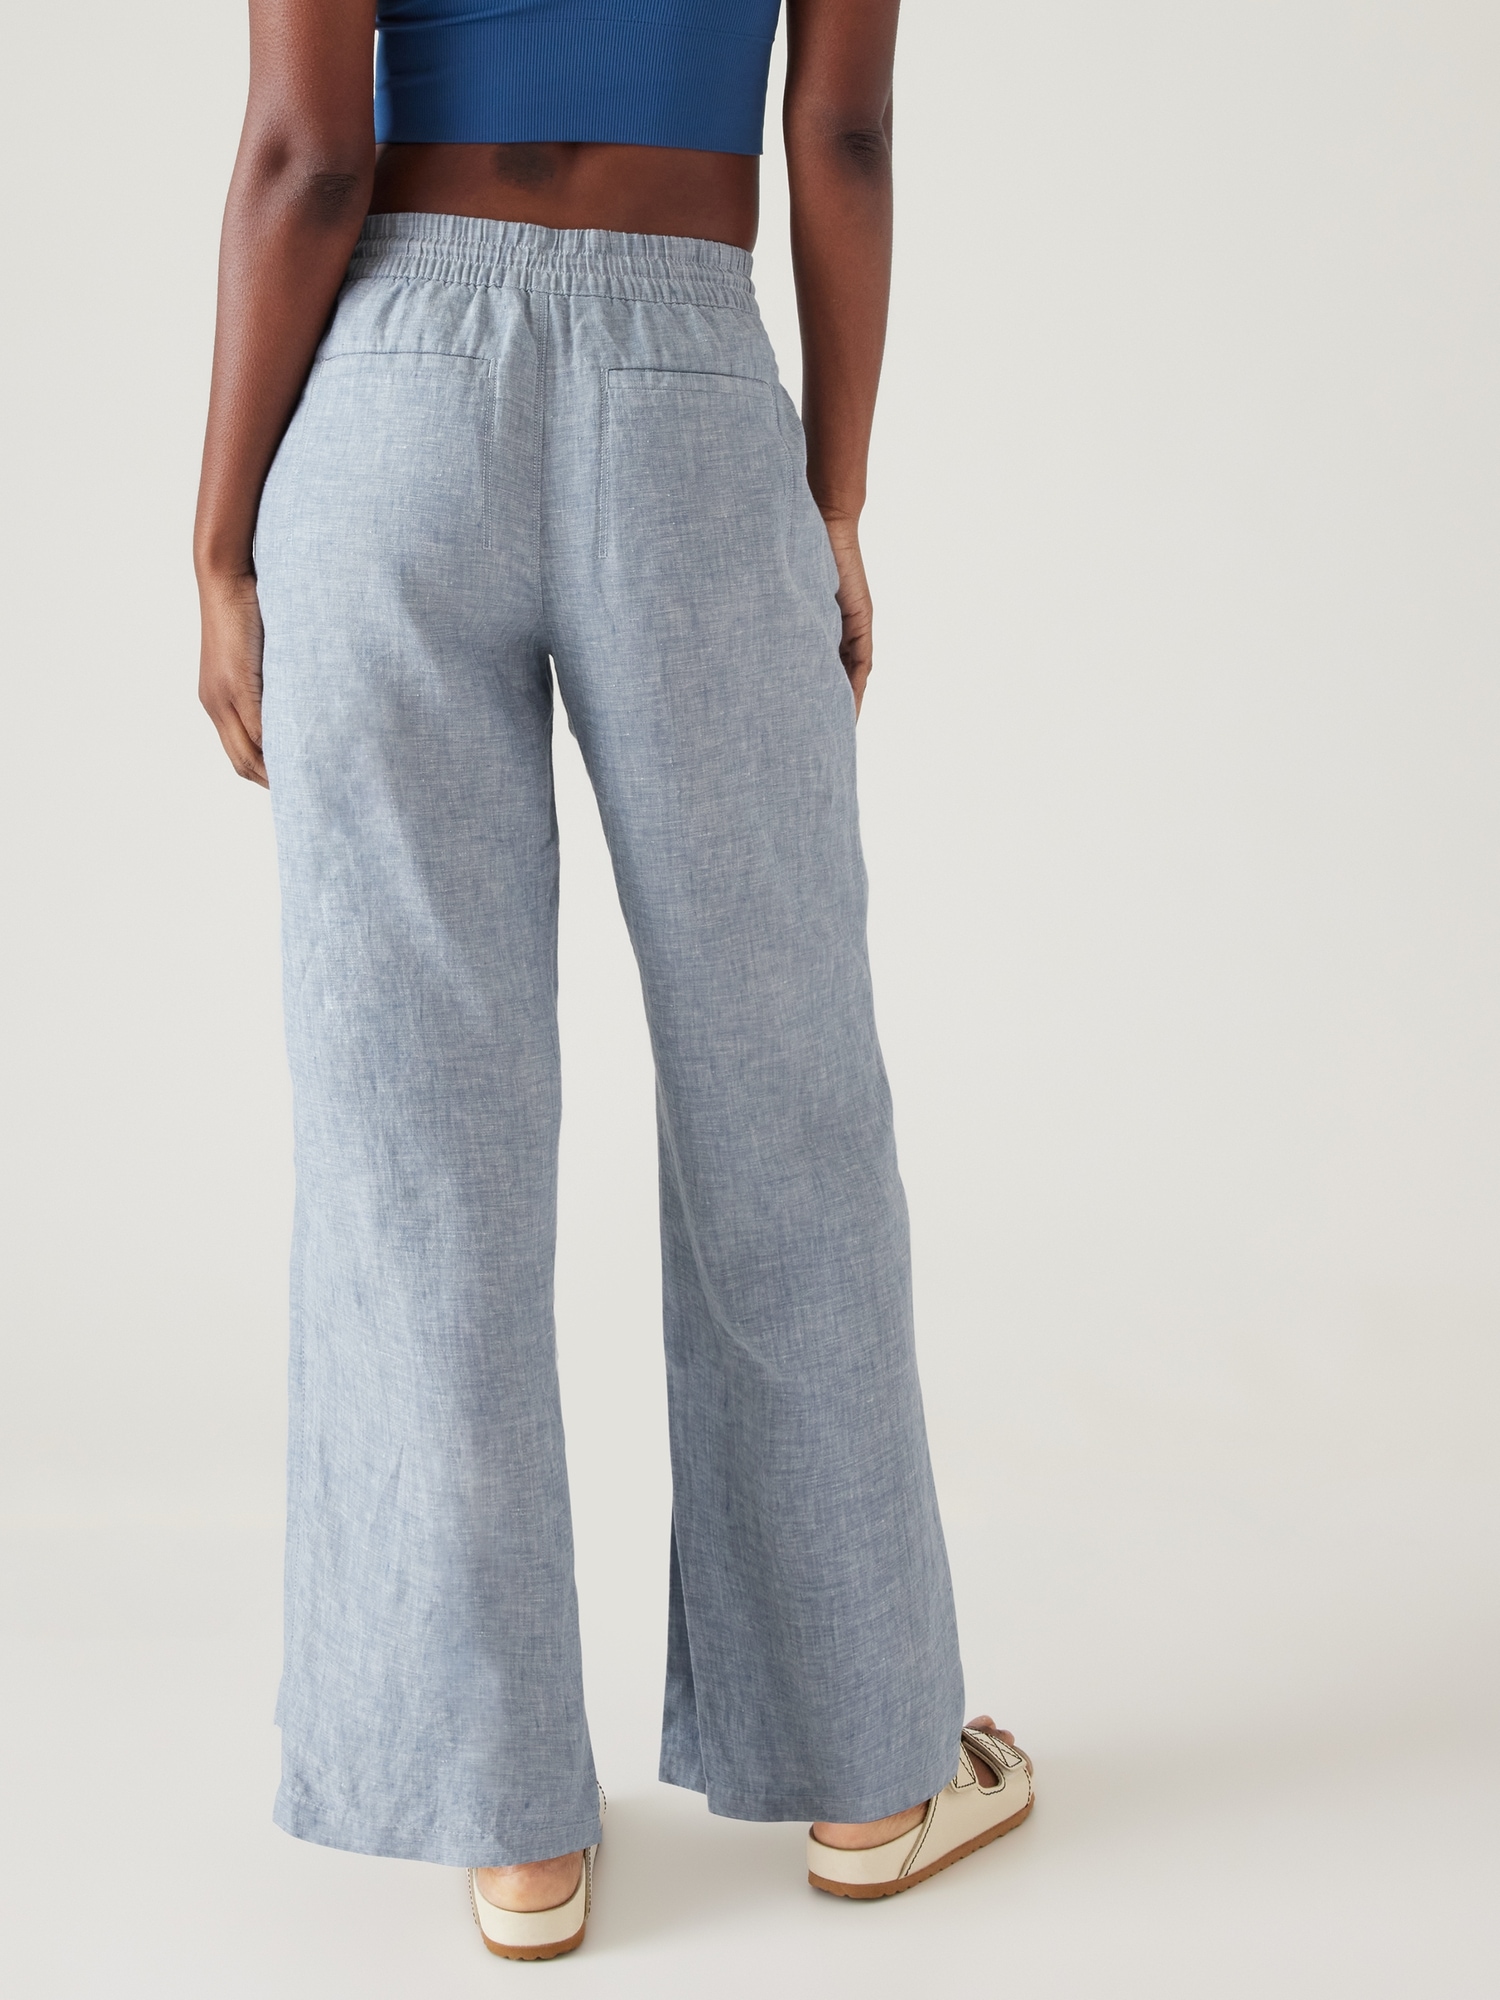 Discover more than 227 gap travel pants latest